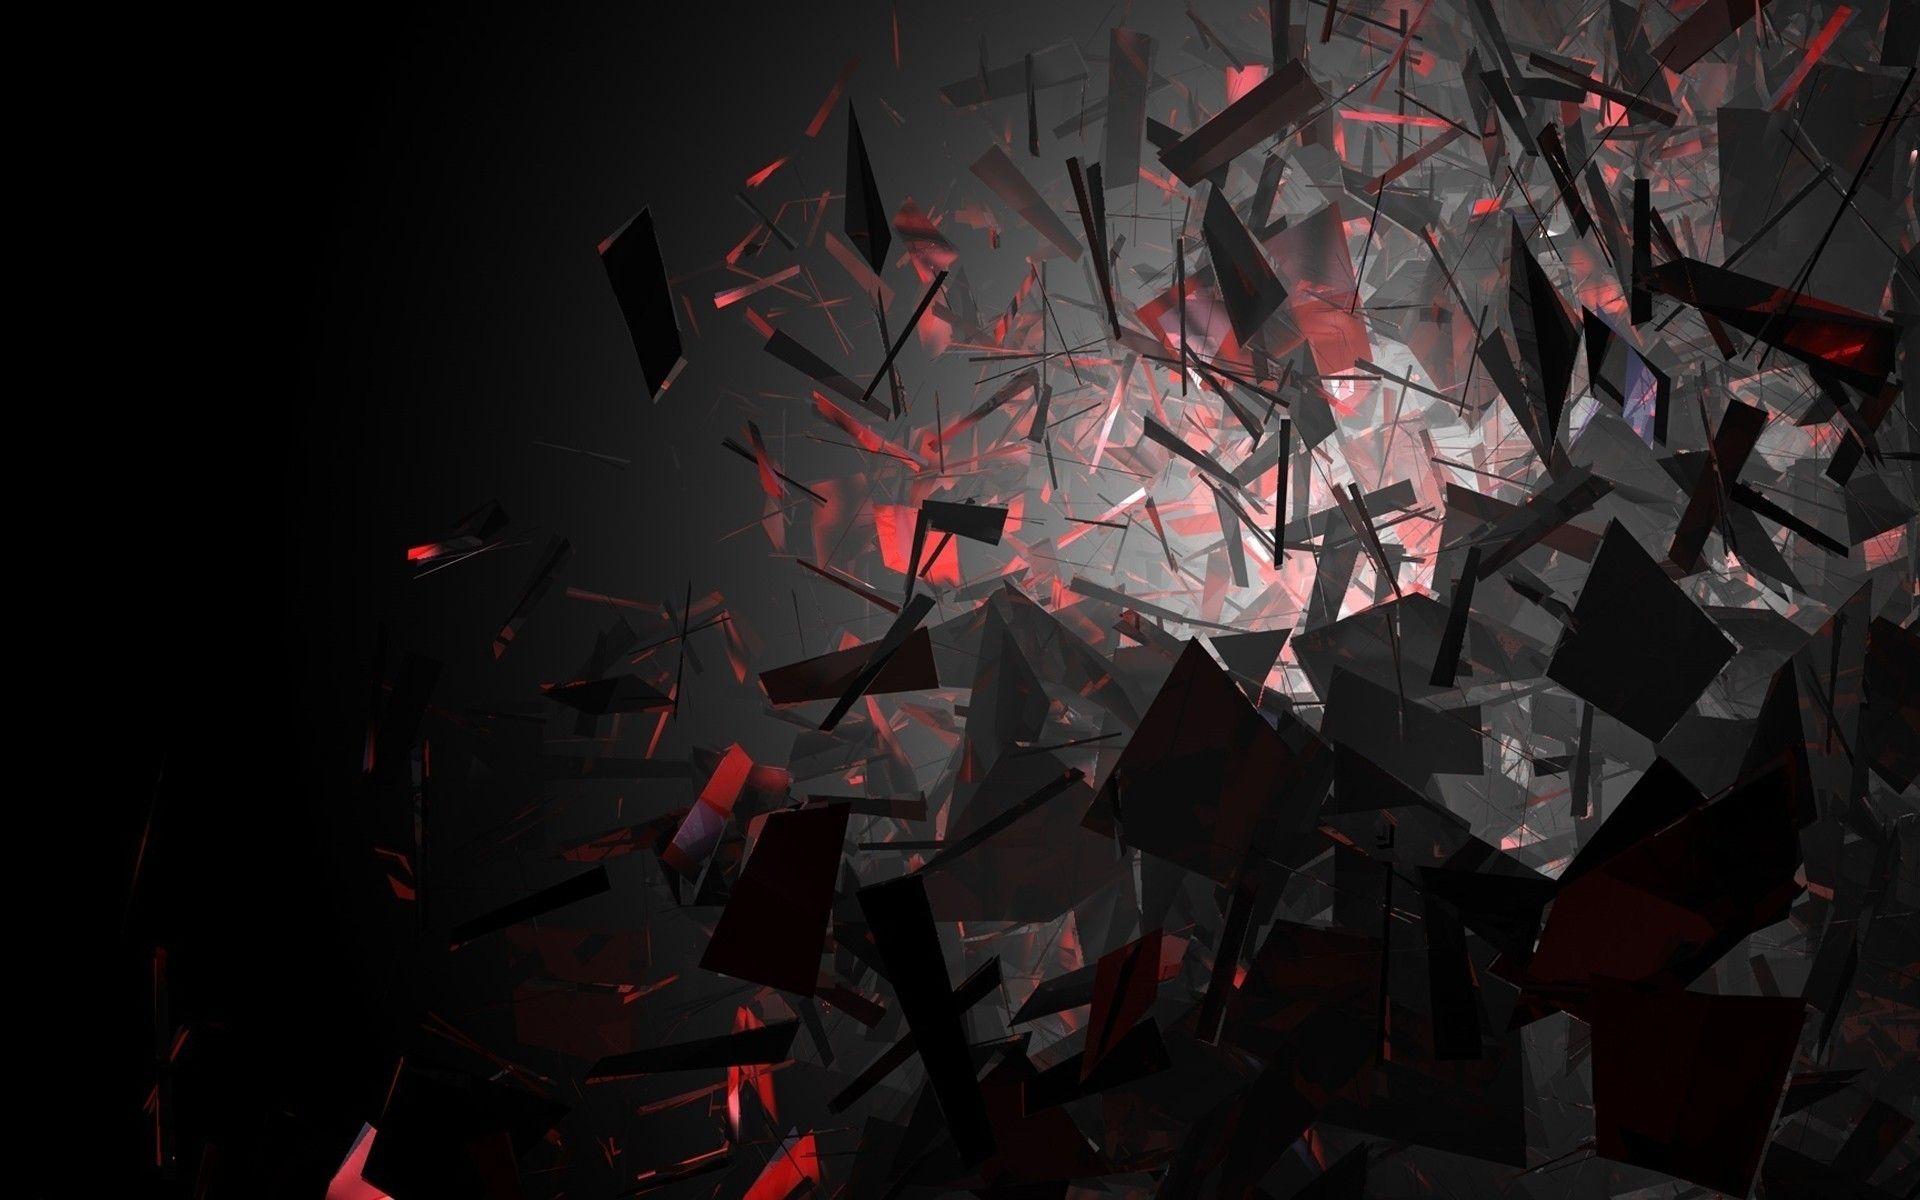 Abstract black and red shapes wallpaper. PC